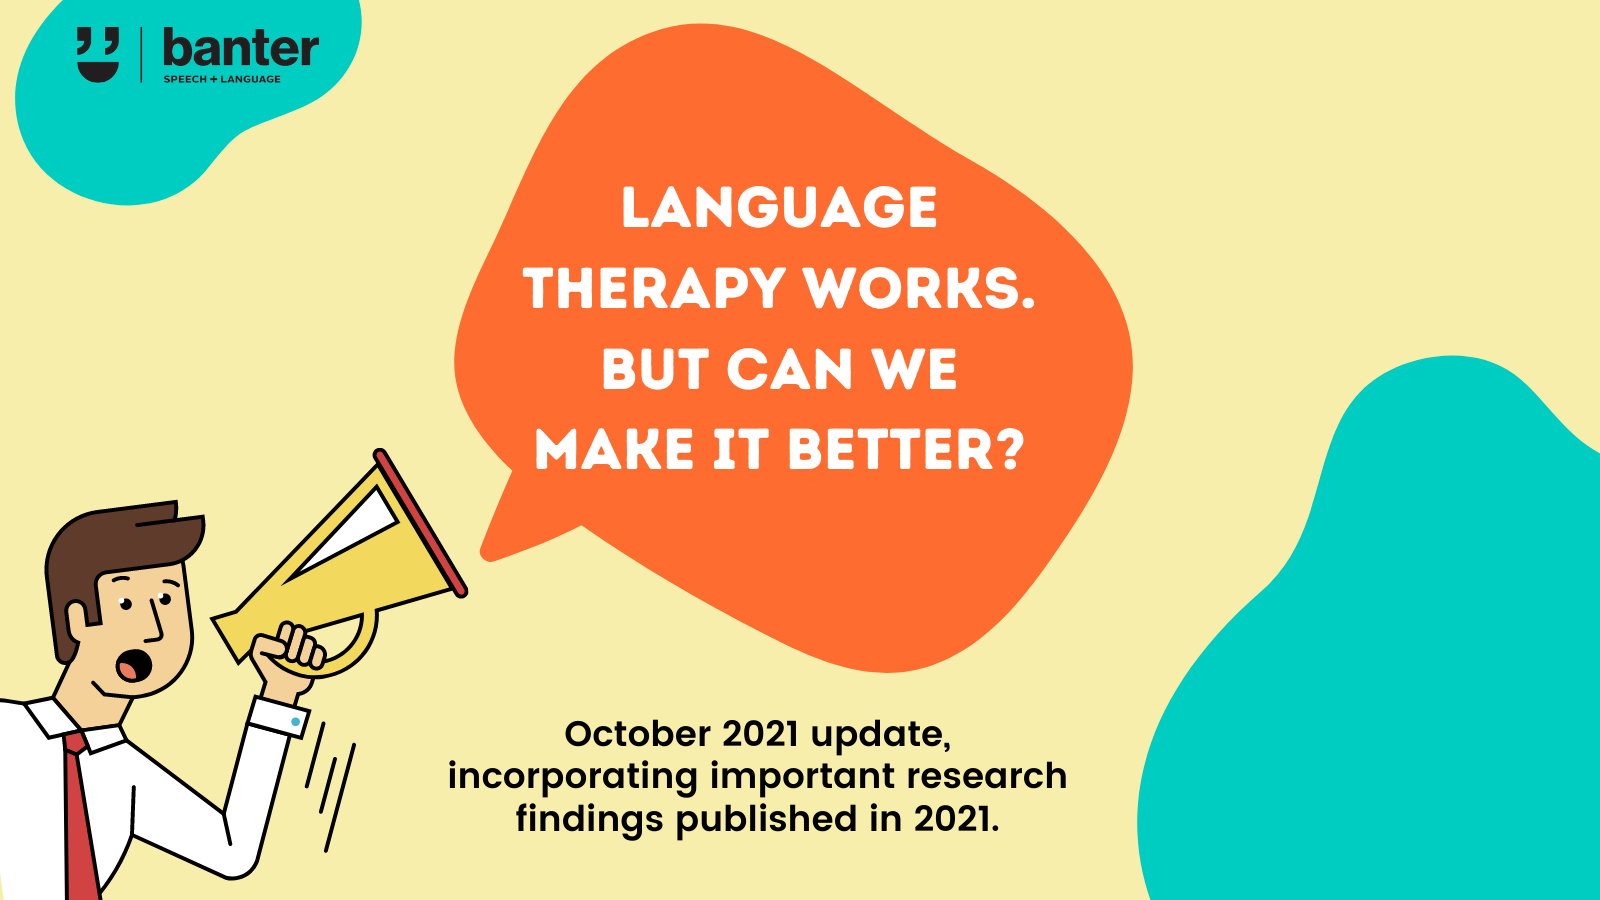 Language therapy works. But can we make it better (October 2021 update, incorporating important research findings published in 2021)